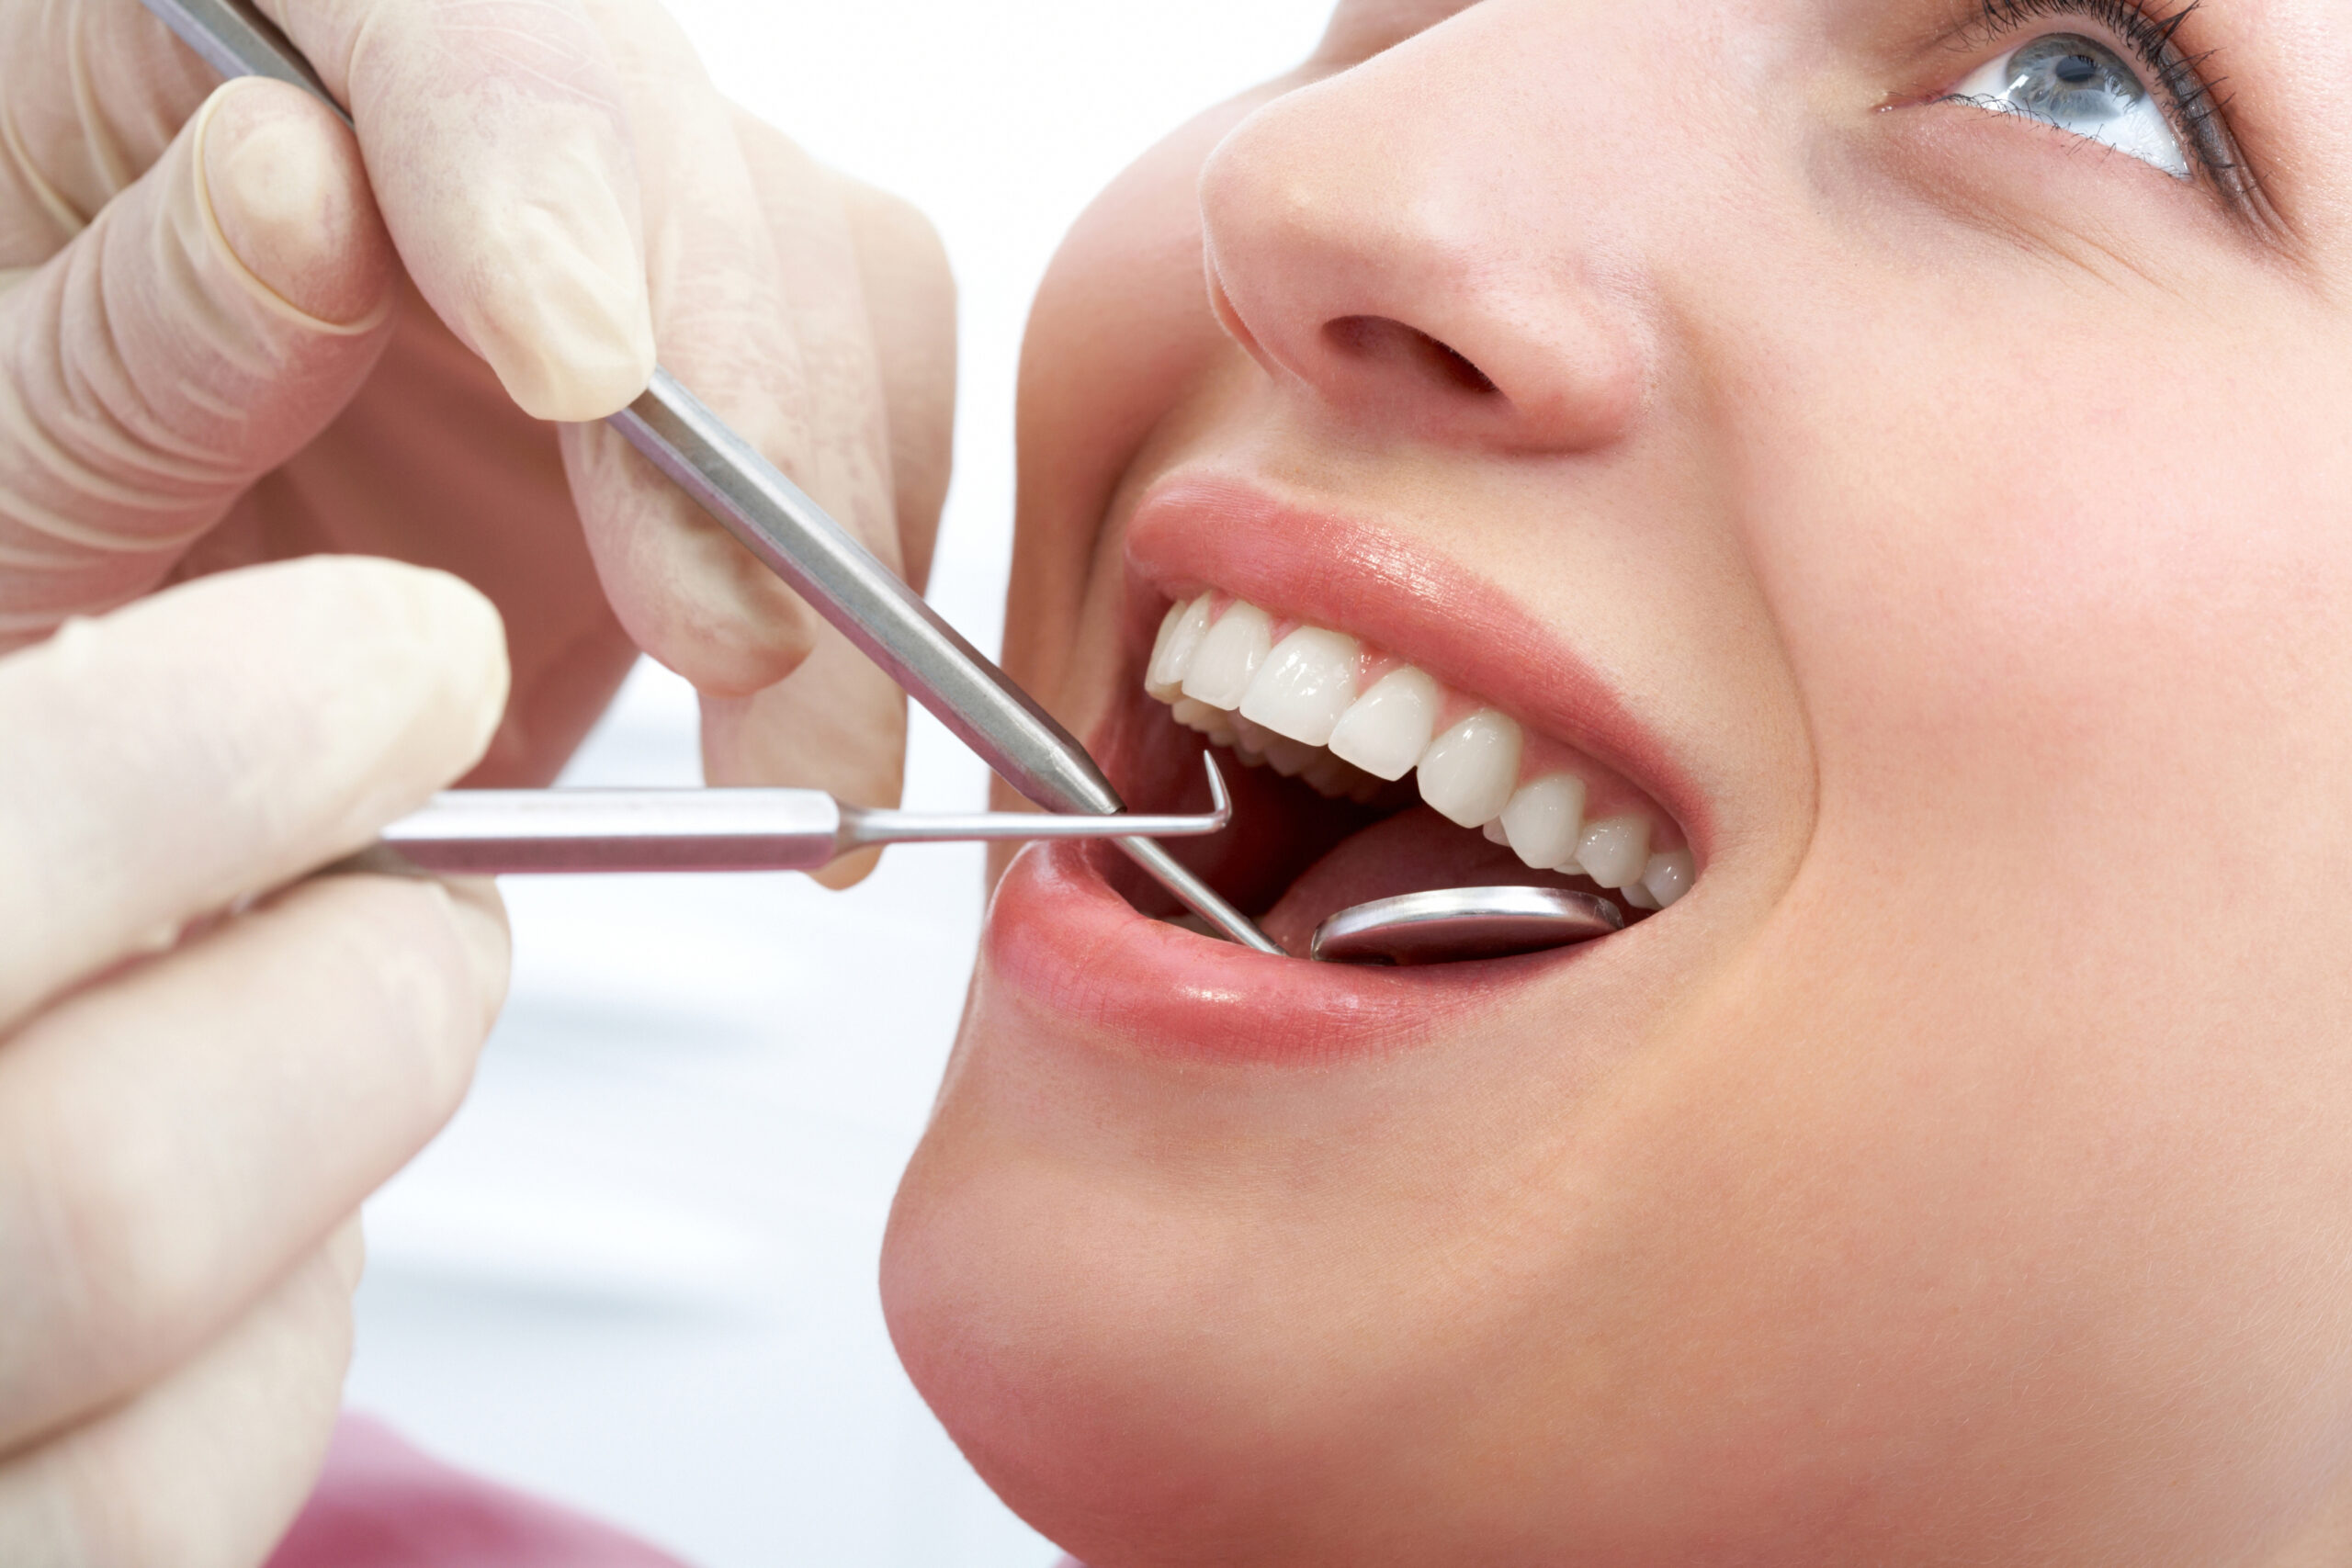 The Process of Getting a Tooth Filled: What to Expect